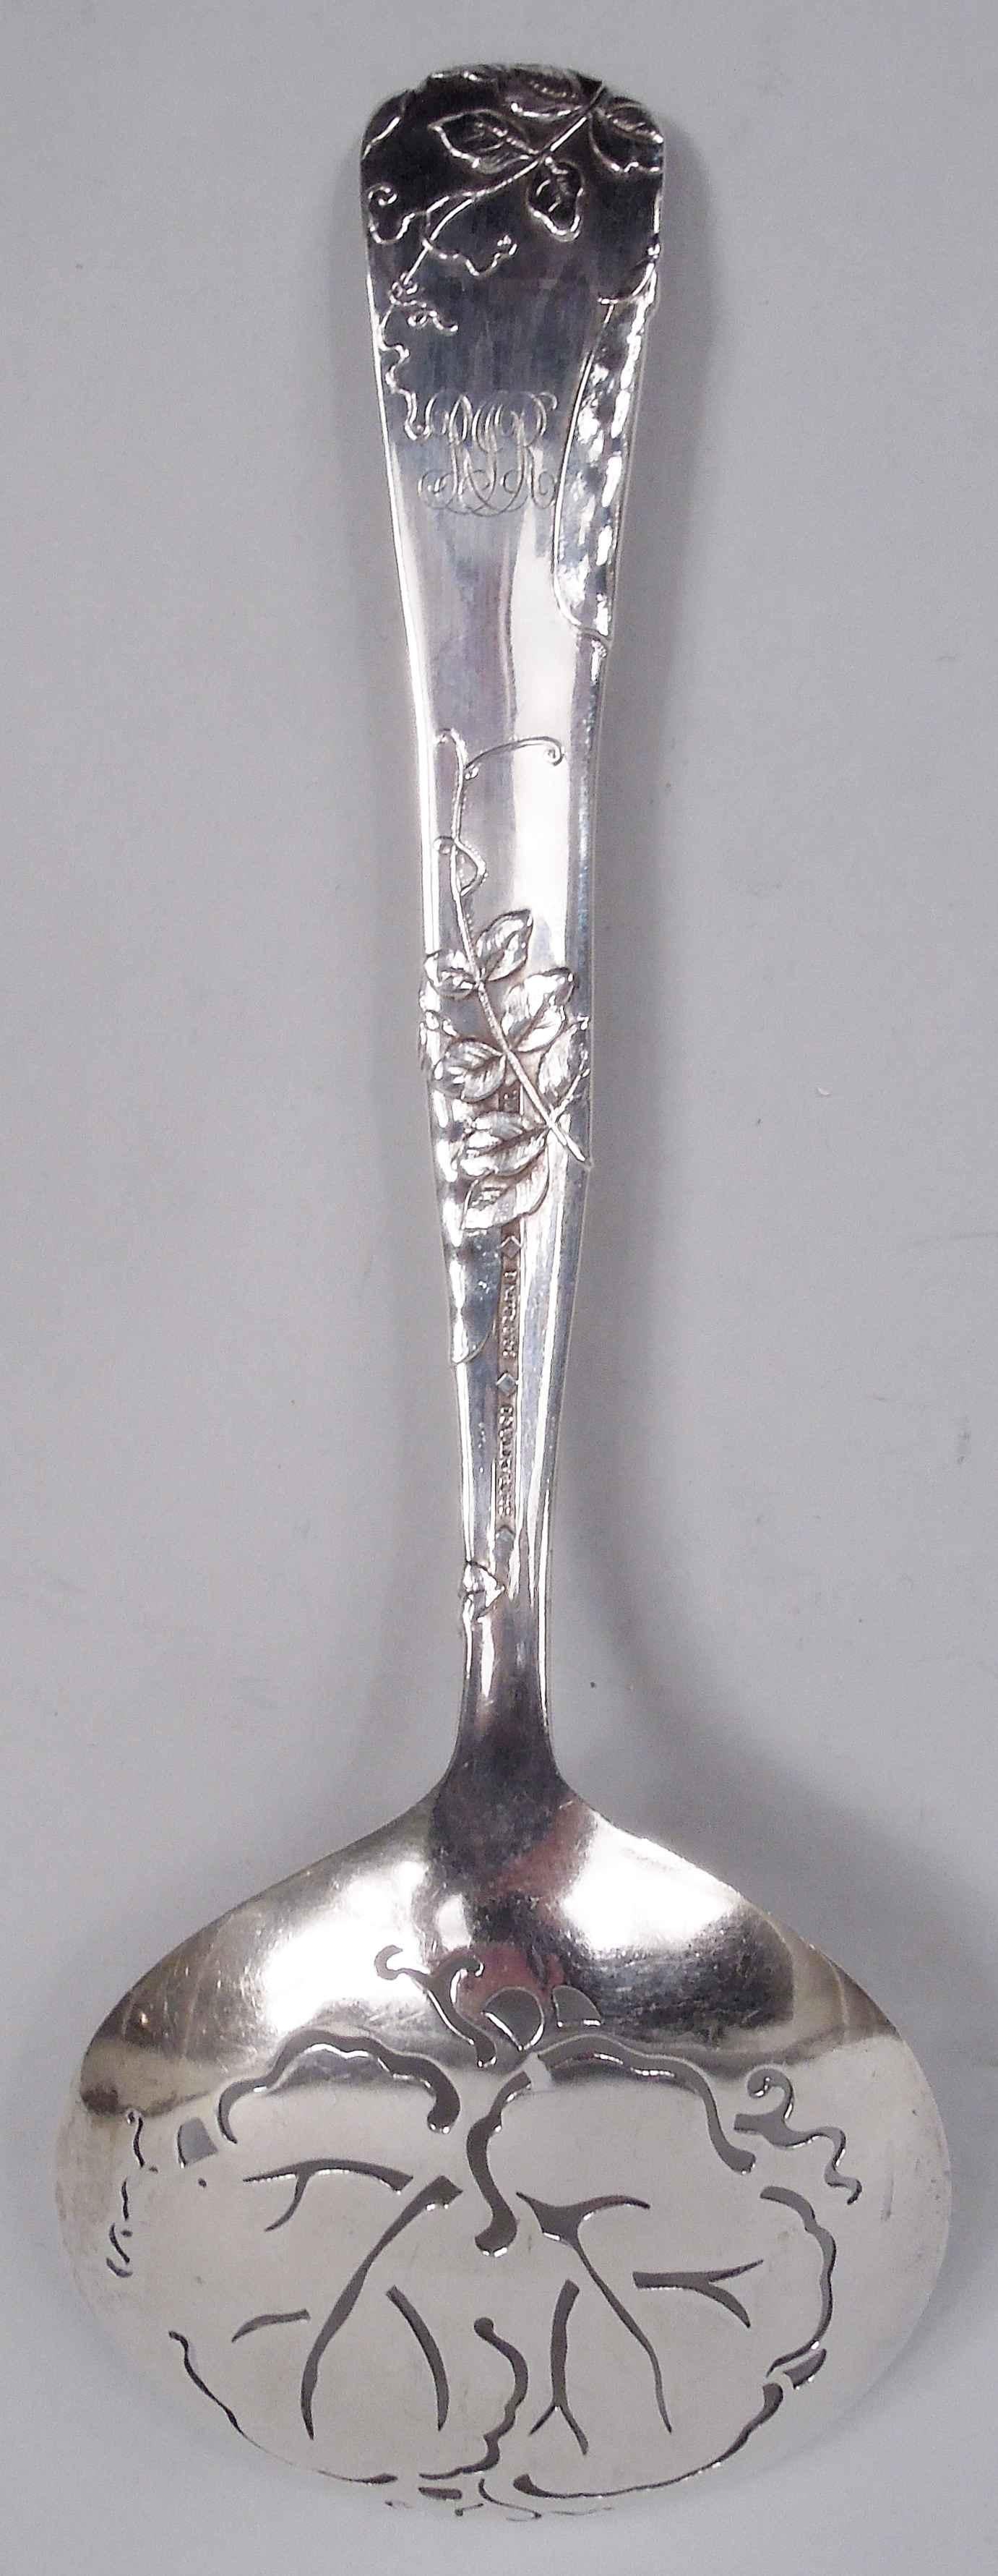 Very desirable sterling silver pea server in Vine. Made by Tiffany & Co. in New York. Tapering handle with loosely arranged wraparound pea pod vine on tapering stem. Round bowl with pierced ornament in same motif. A beautiful conflation of symbolism